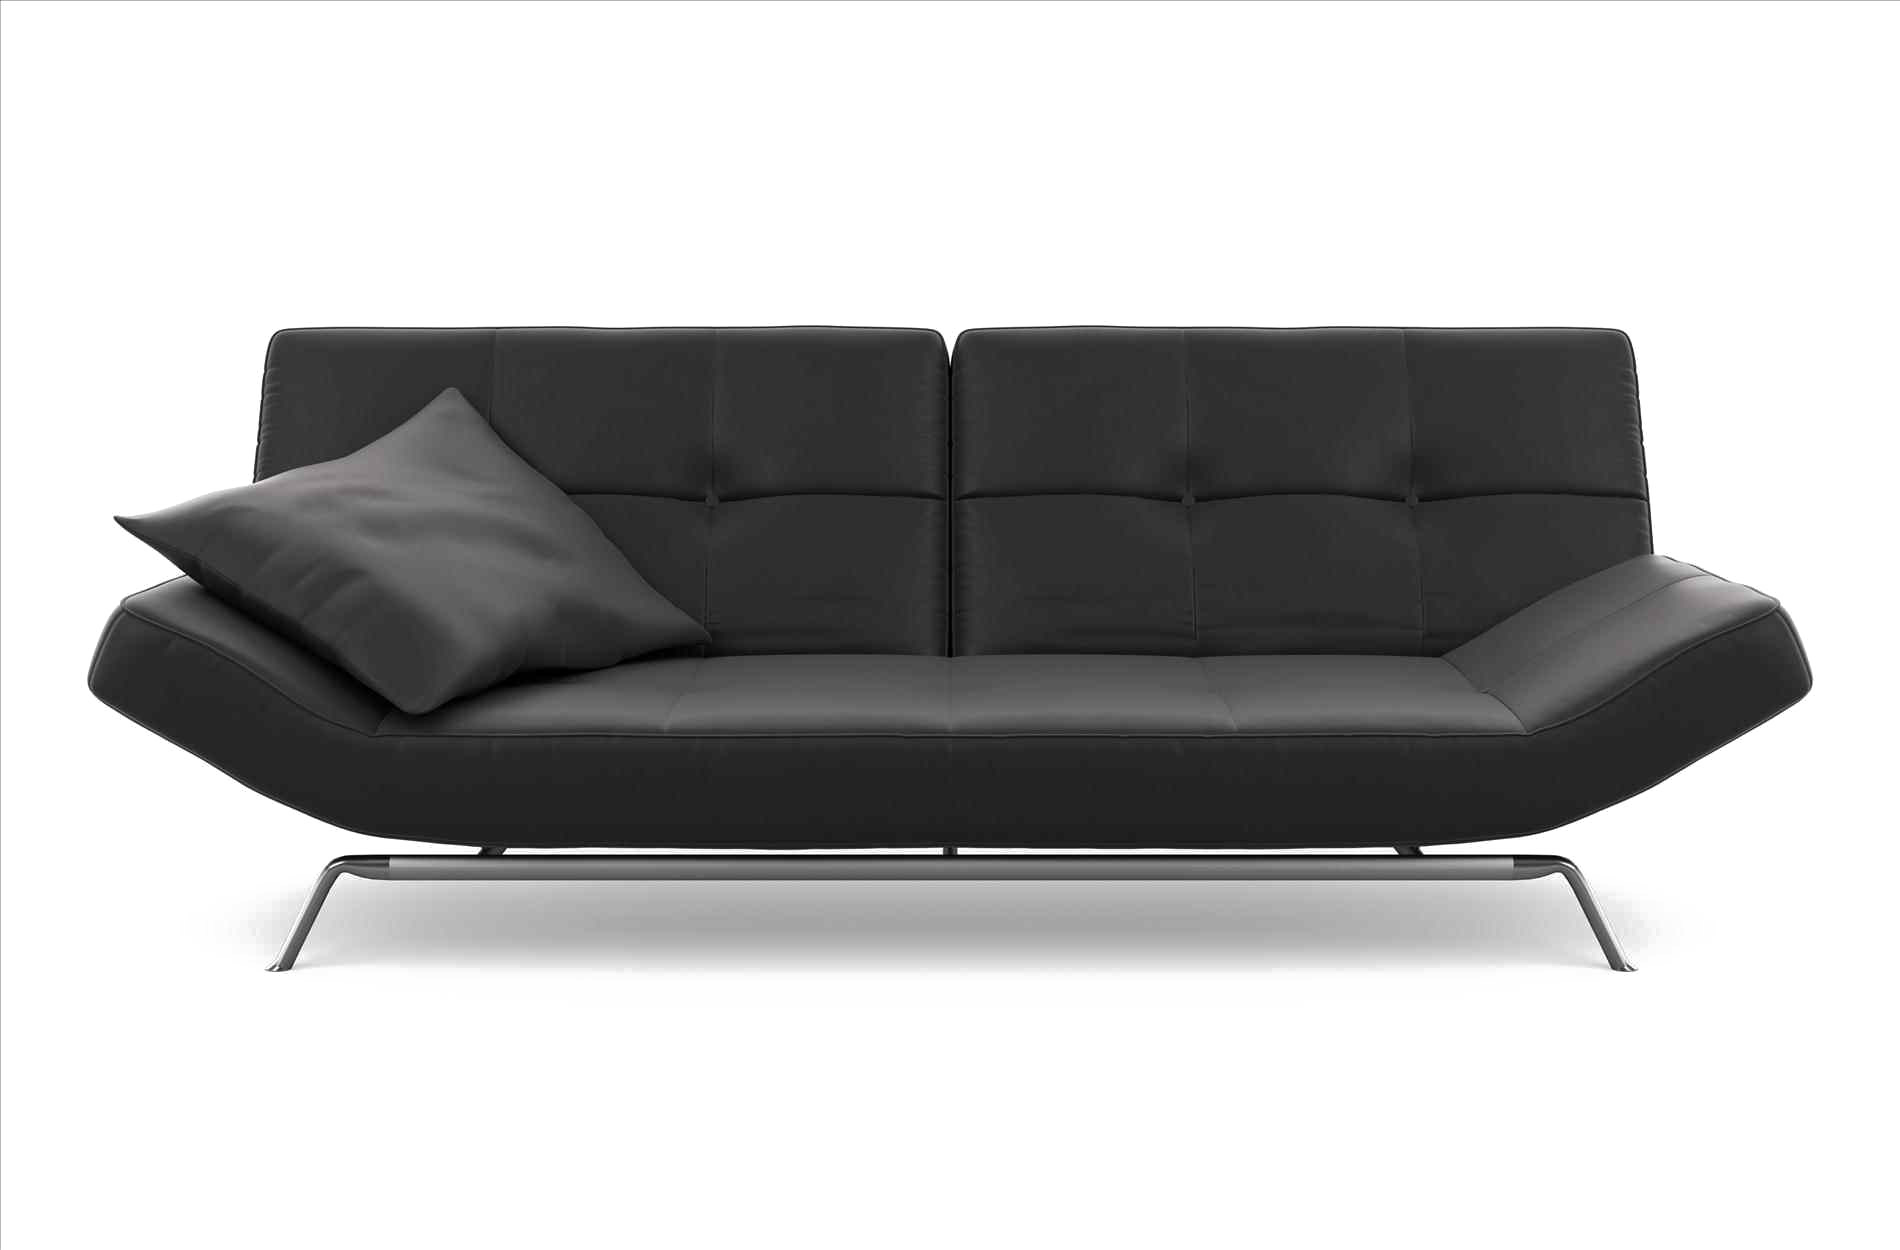 Couch PNG Image in Transparent pngteam.com